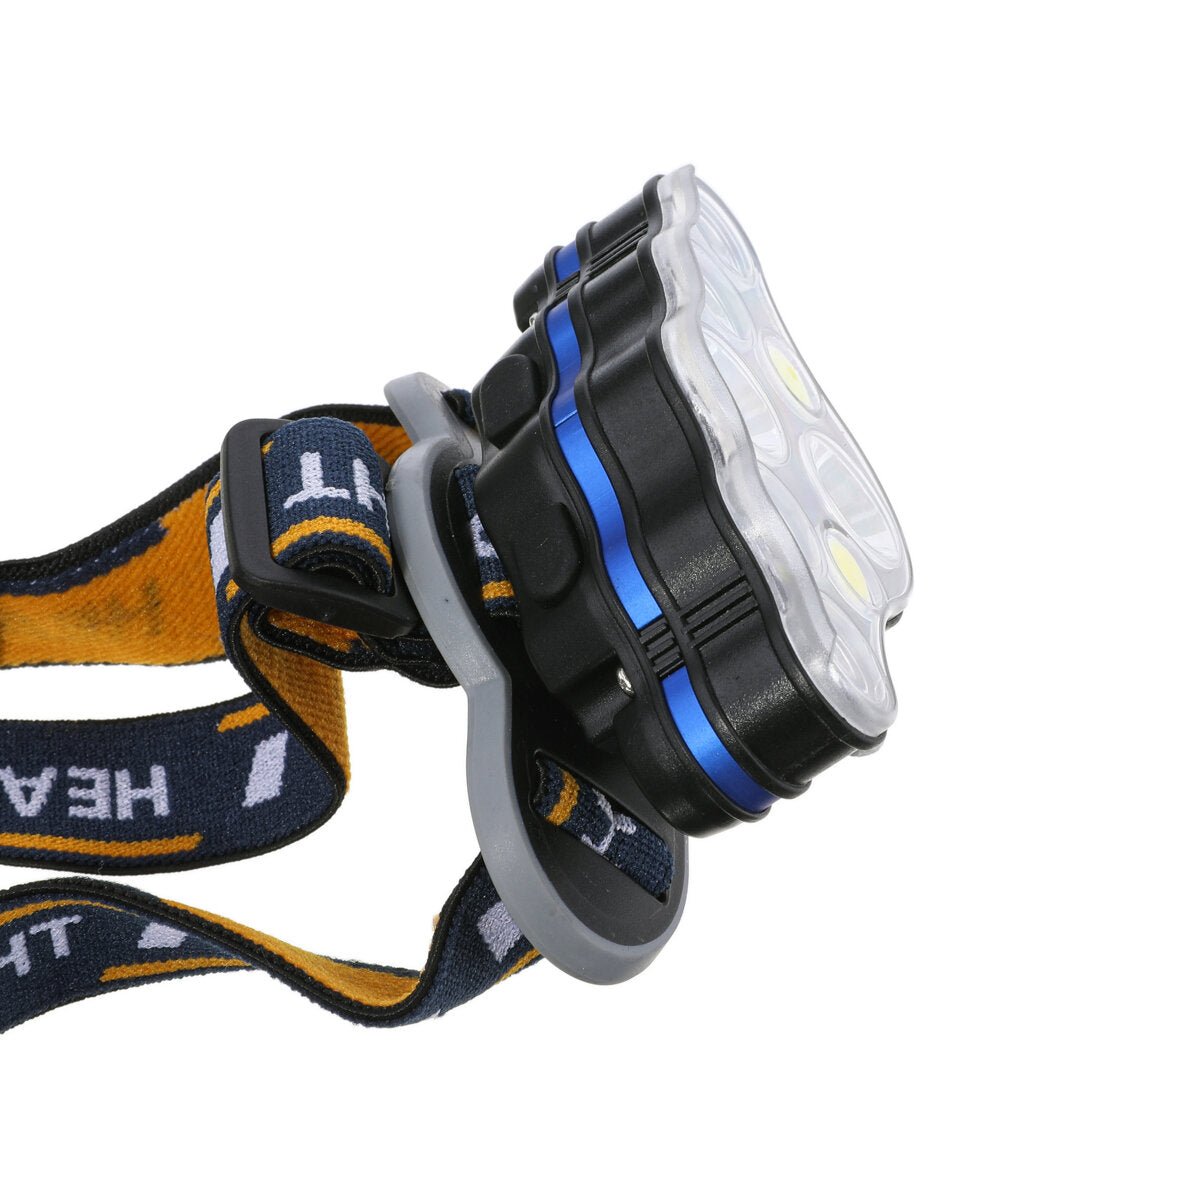 The Ultimate Head Torch with 8 Headlights, Mechanical Zoom and USB Charging